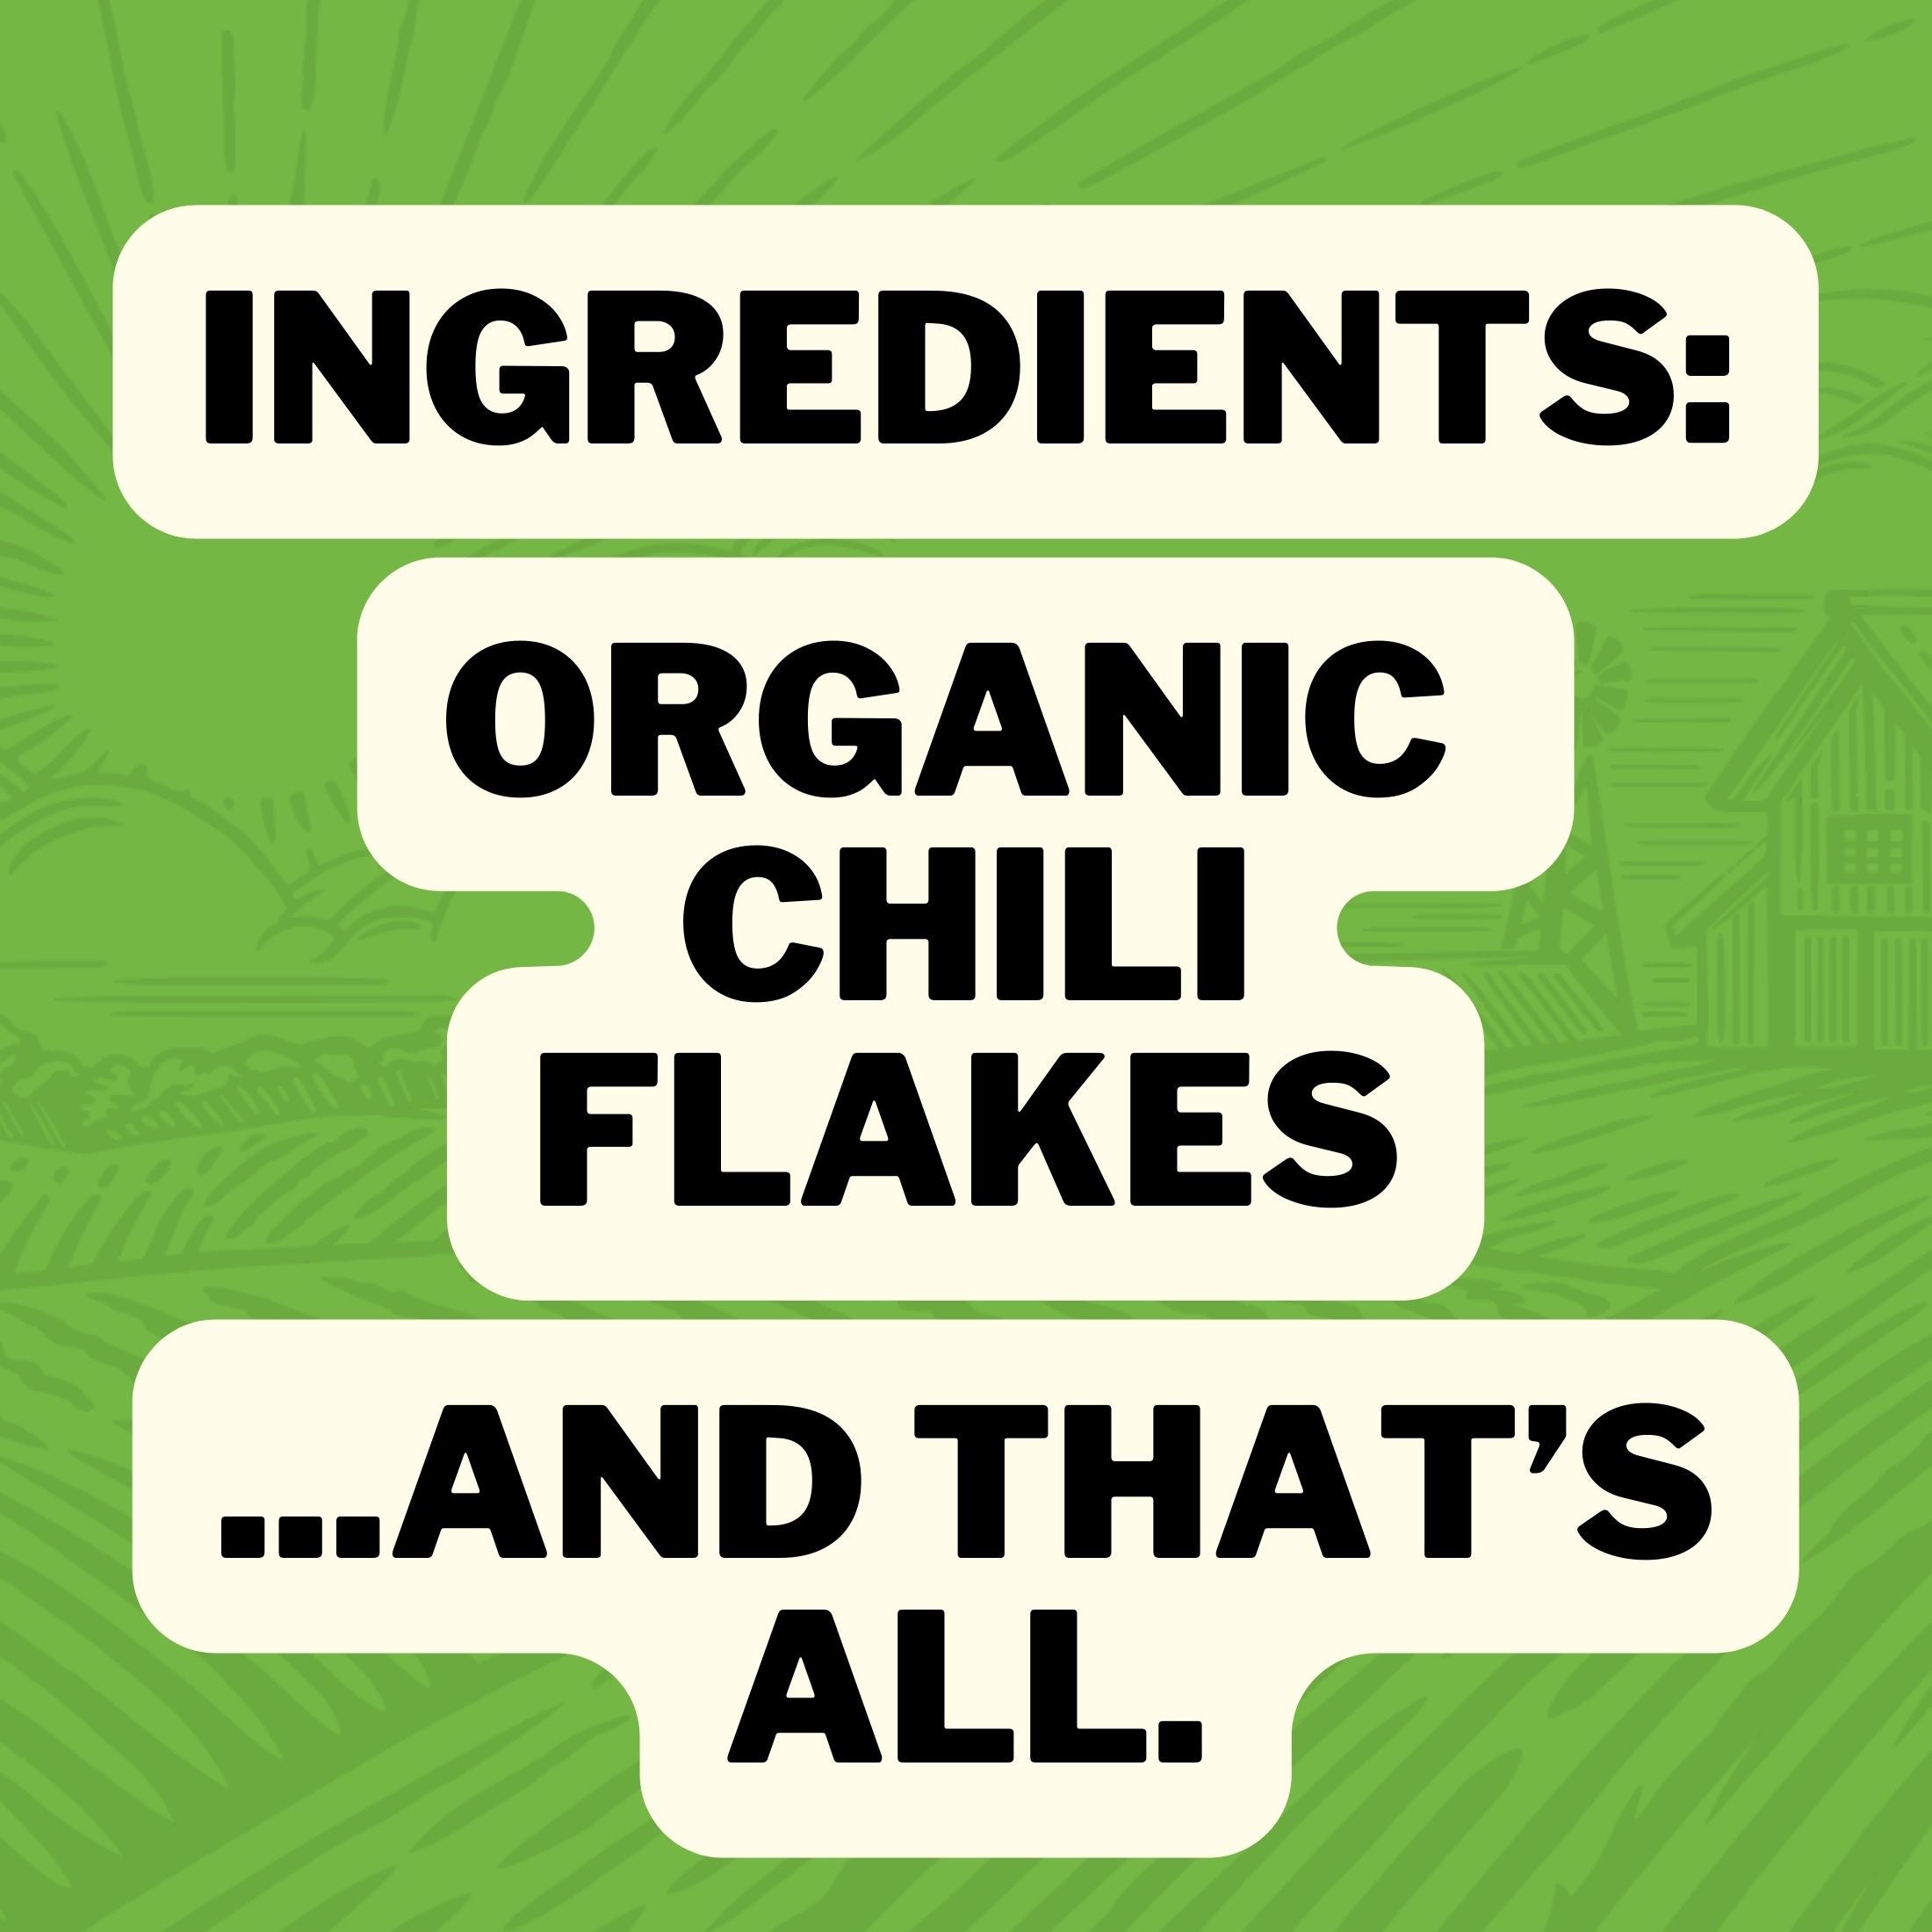 Ingredients : Organic Chili Flakes ... And That's All.